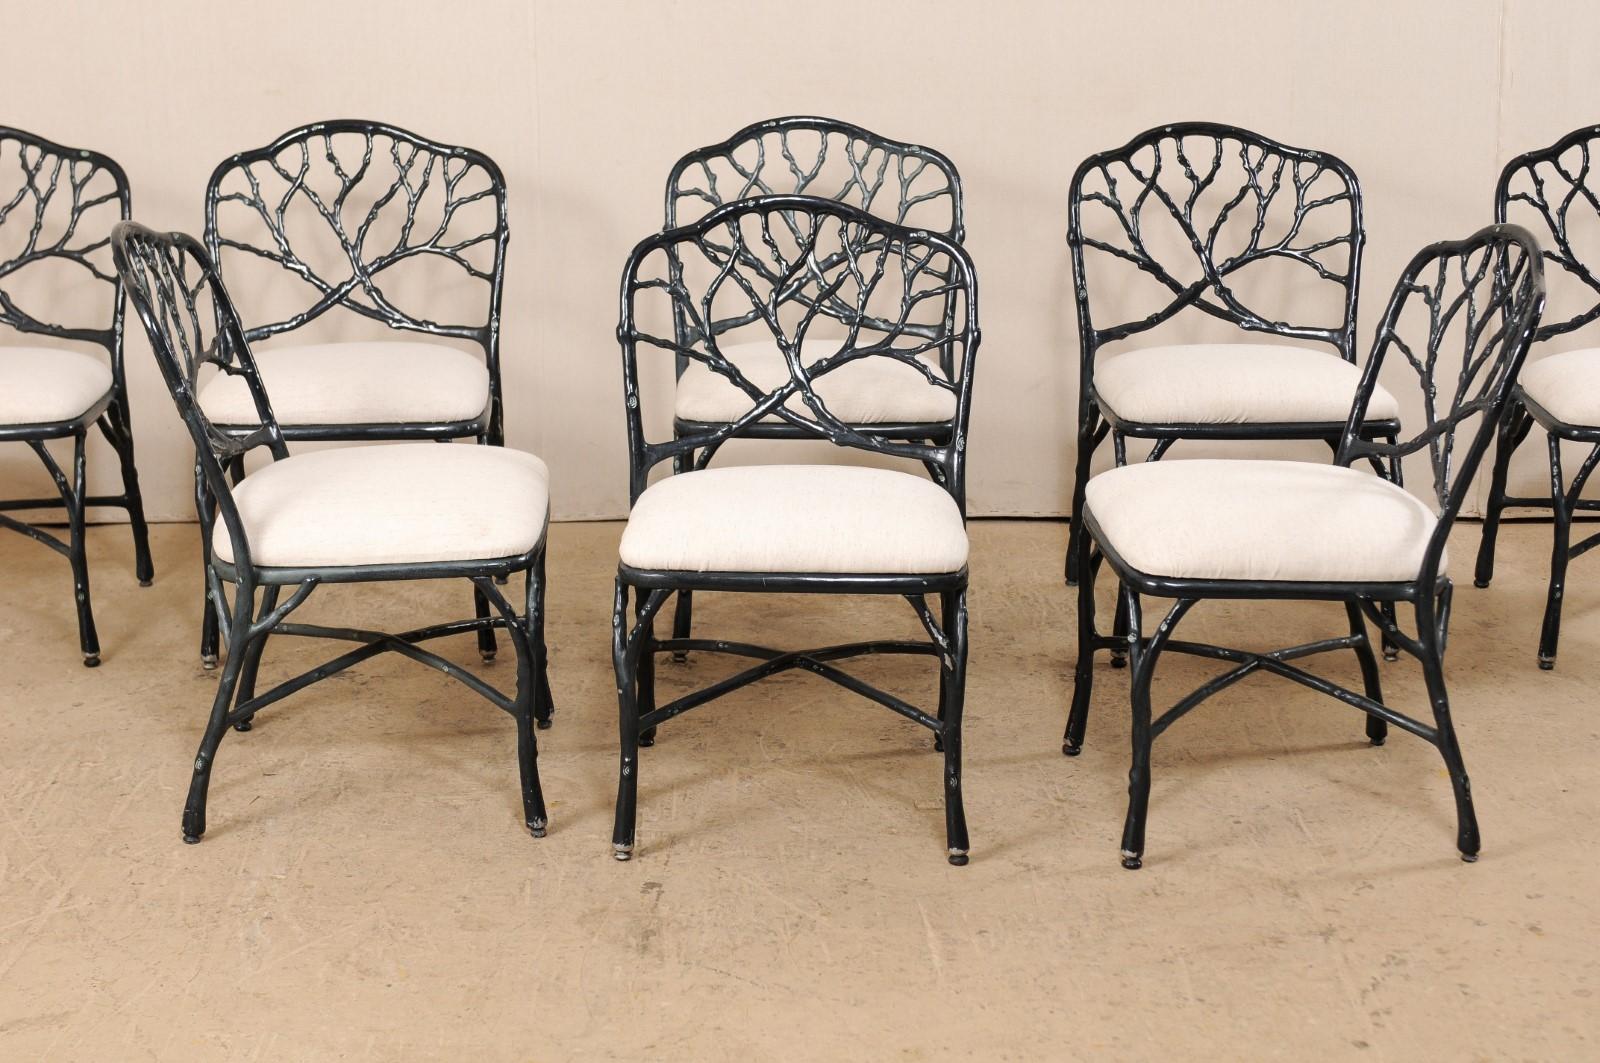 Whimsical Set of Eight Twig & Branch Motif Vintage American Patio Dining Chairs 4